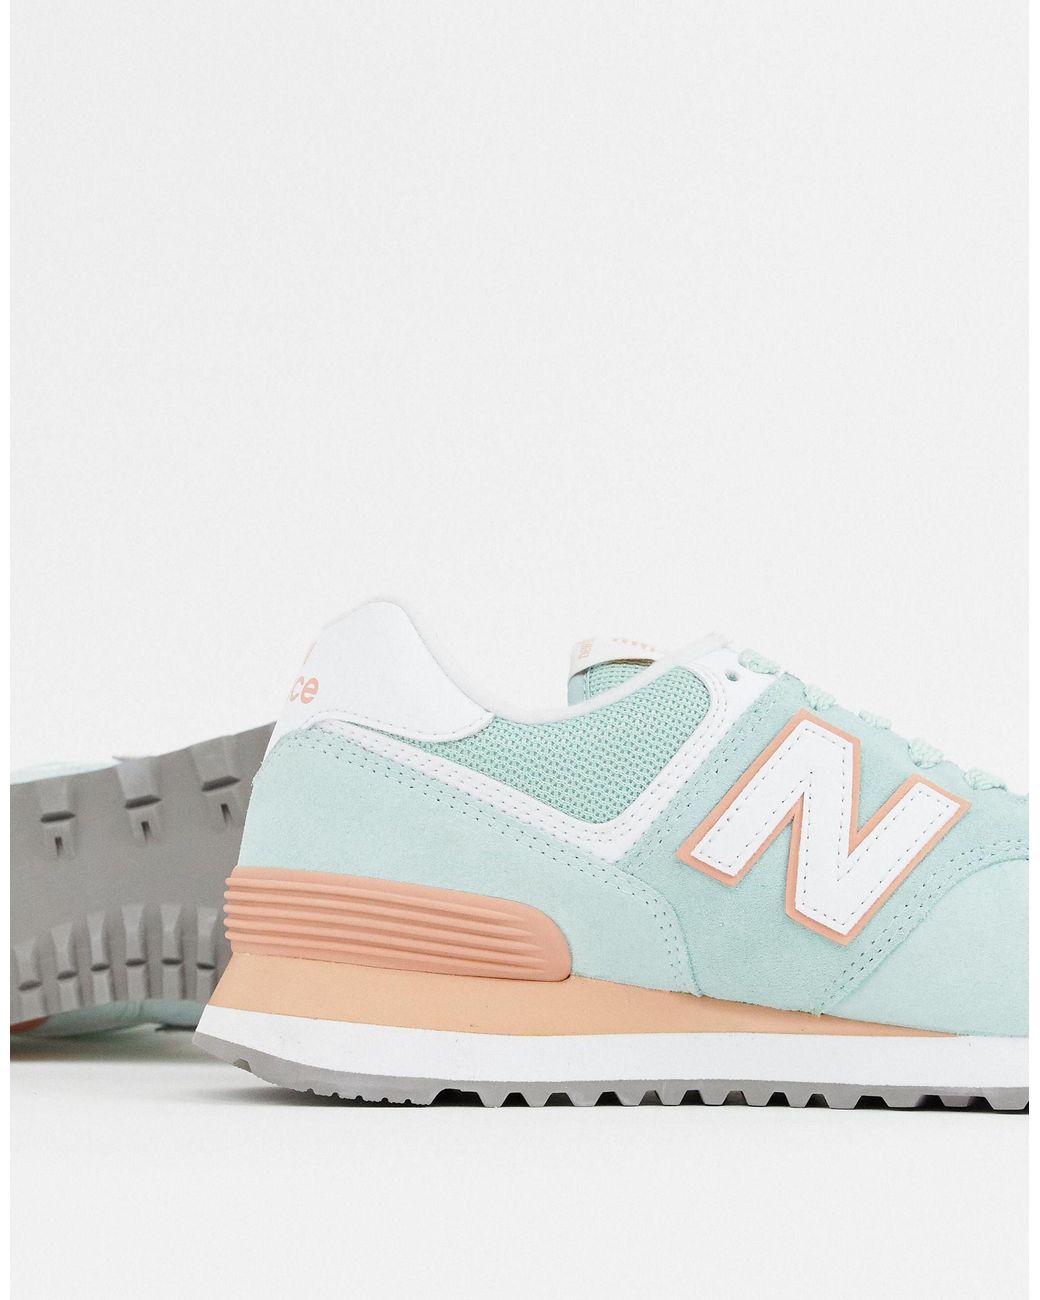 New Balance 574 V2 Pastel Mint Sneakers in Green | Lyst